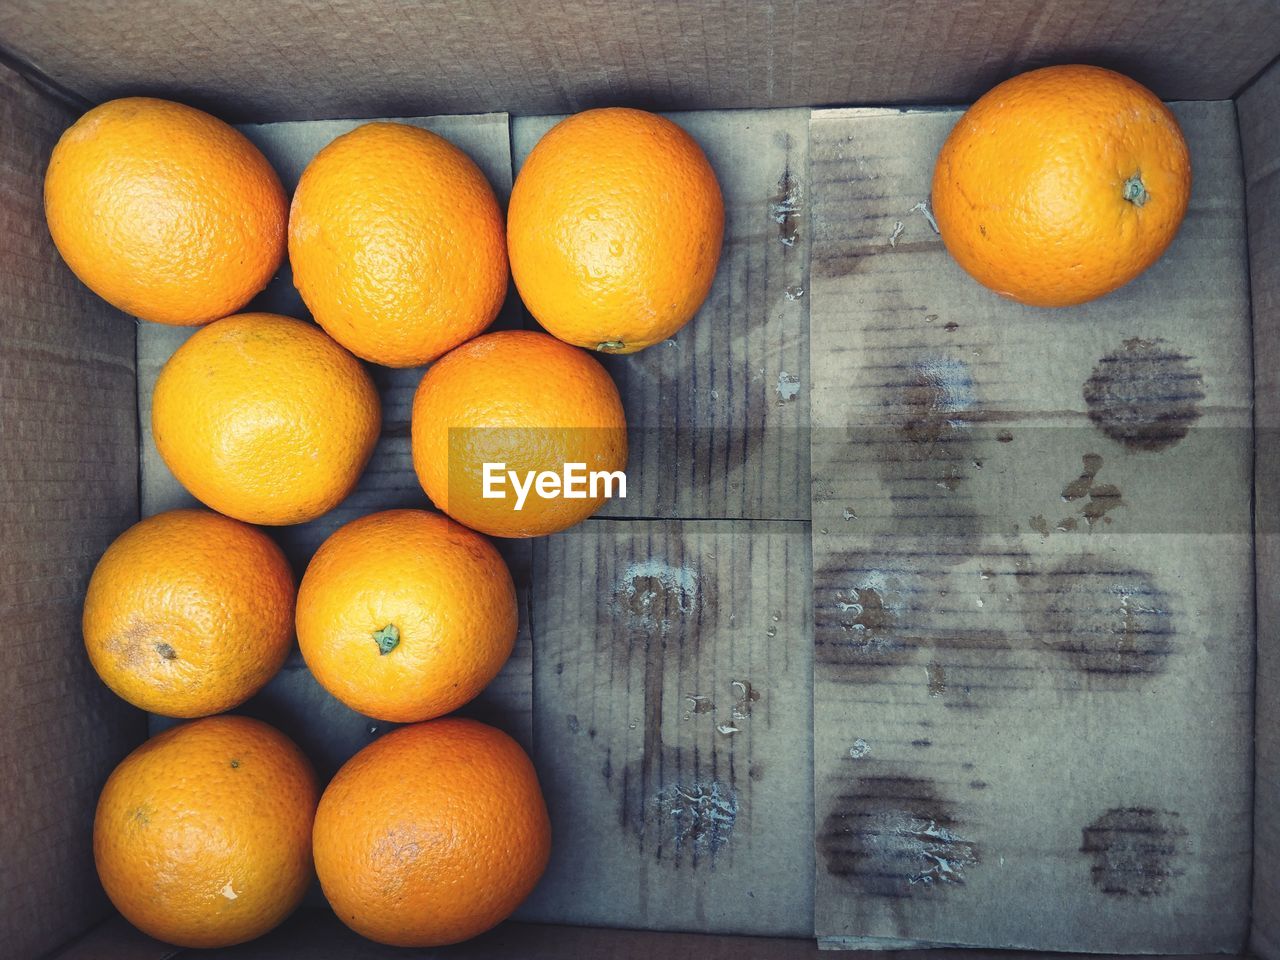 HIGH ANGLE VIEW OF ORANGE ORANGES ON WOODEN TABLE